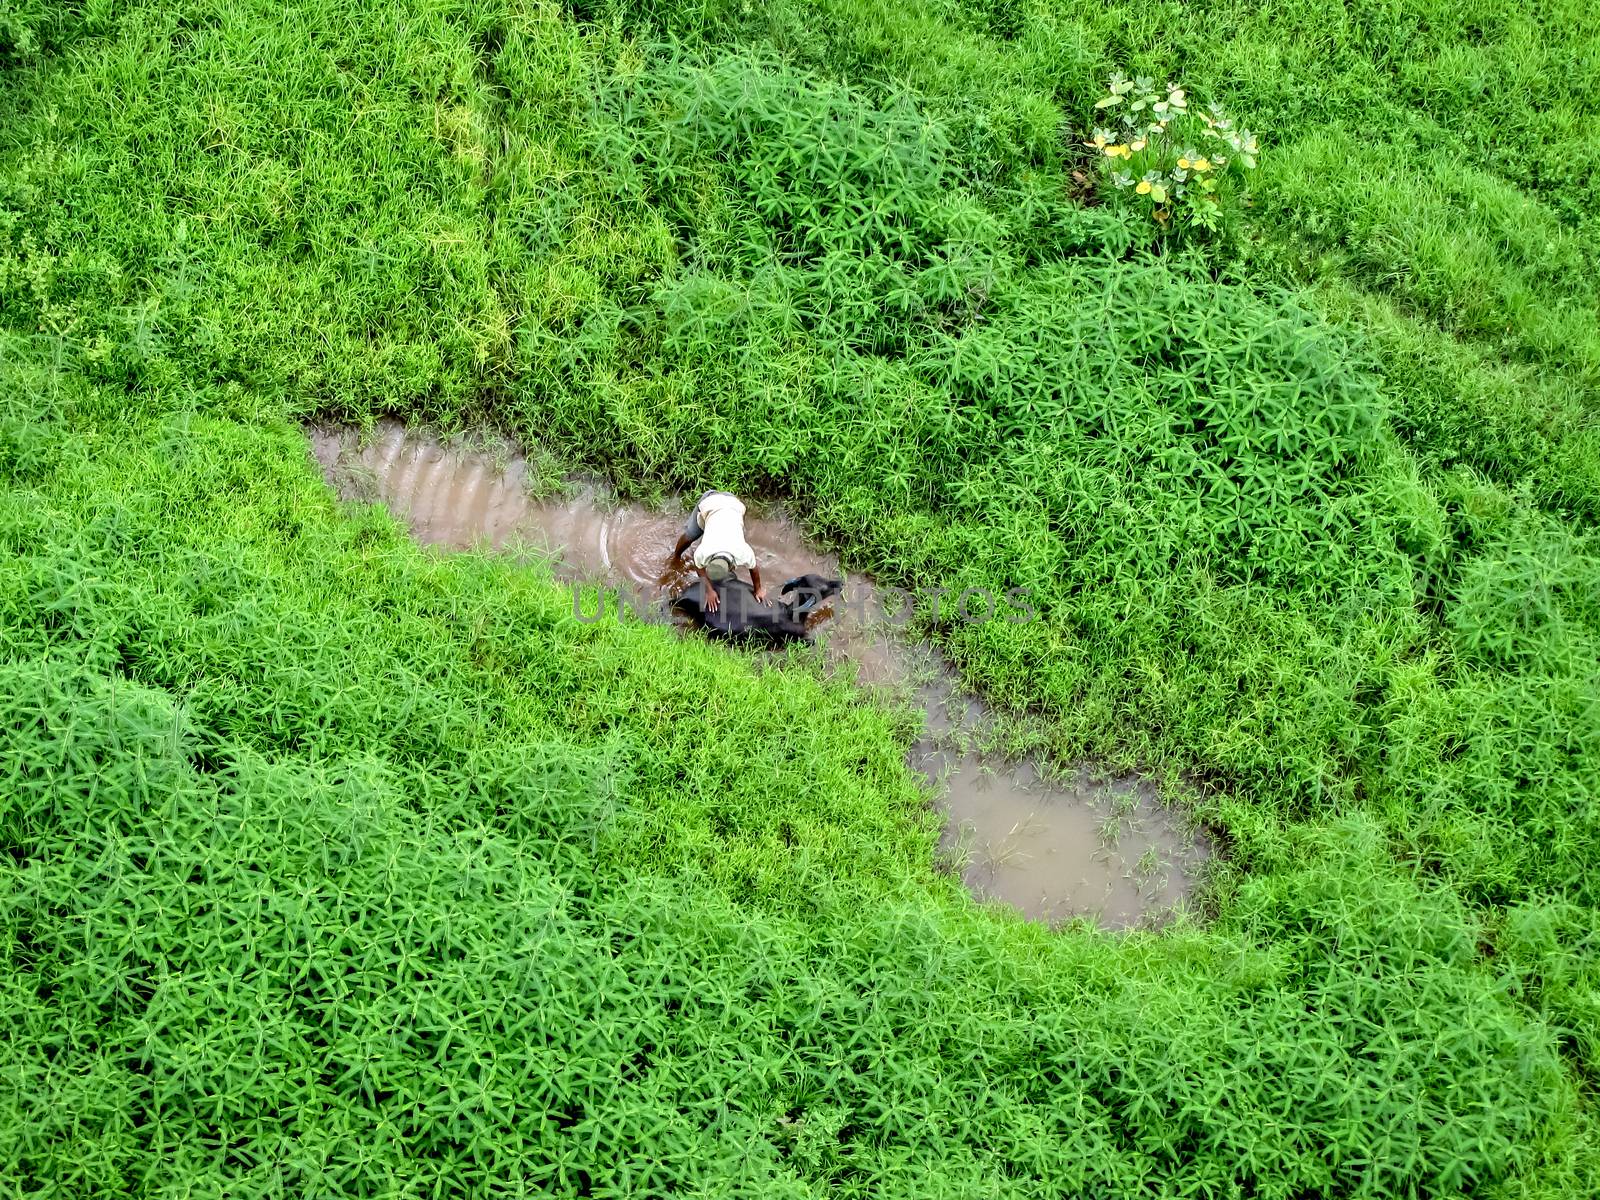 A milkman washing his buffalo in a pond surrounded by lush green bushes. by lalam